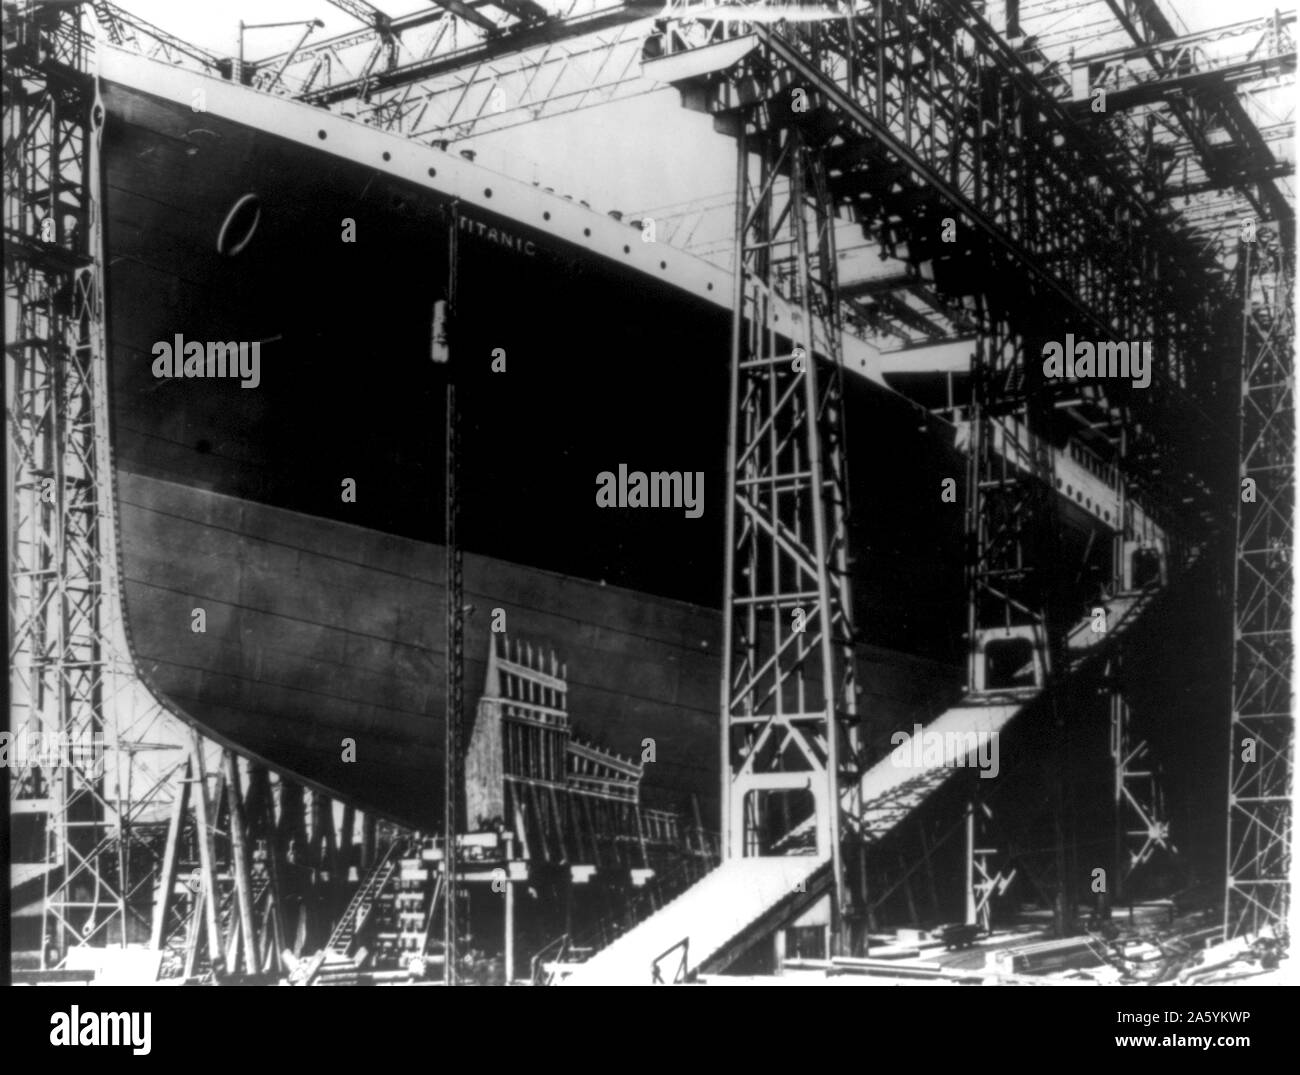 The Titanic, White Star, Liner on the stocks in Harland & Wolff's shipyard, Belfast, Northern Ireland.  She sank on 12 April 1912 after striking an iceberg on her maiden voyage to New York . More than 1,500 lives lost. Disaster Shipwreck Stock Photo